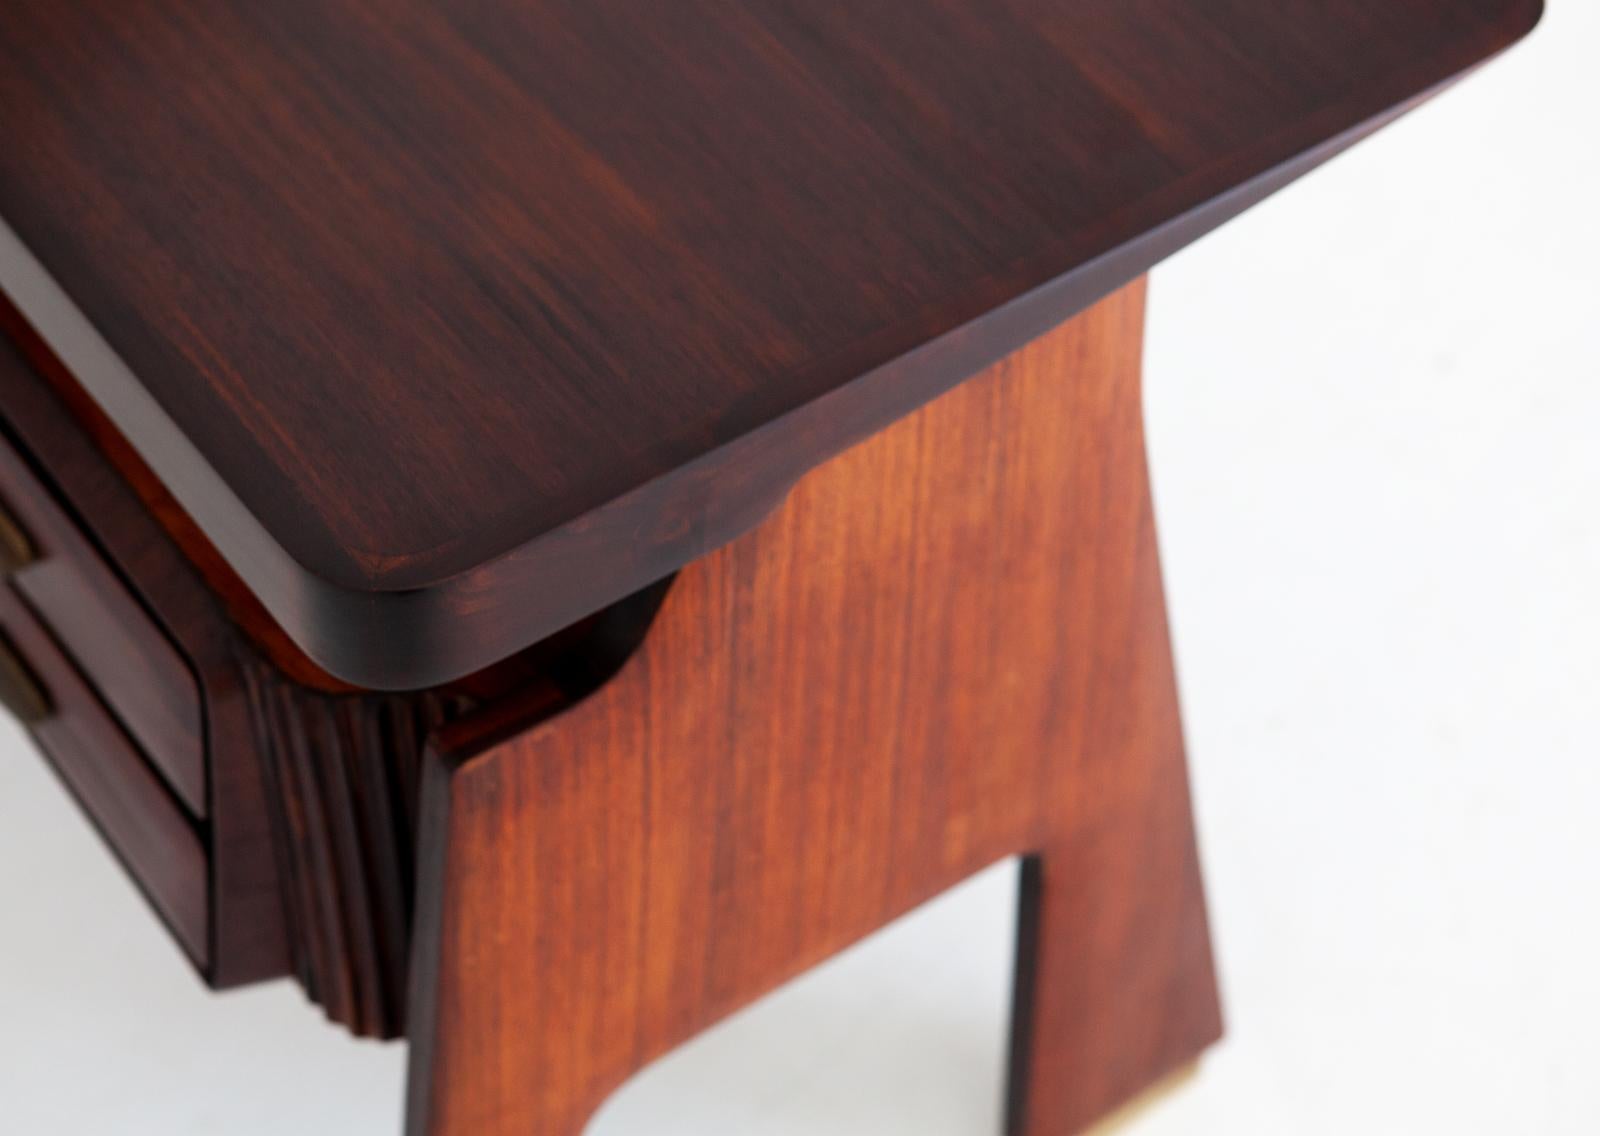 A small day desk that is made of sculptural rosewood base with two drawers and brass handles and feet’s.
The ultra modern but soft lines, the lightness of the design, the incredible handwork of the drawer make this object unique in its kind.

The